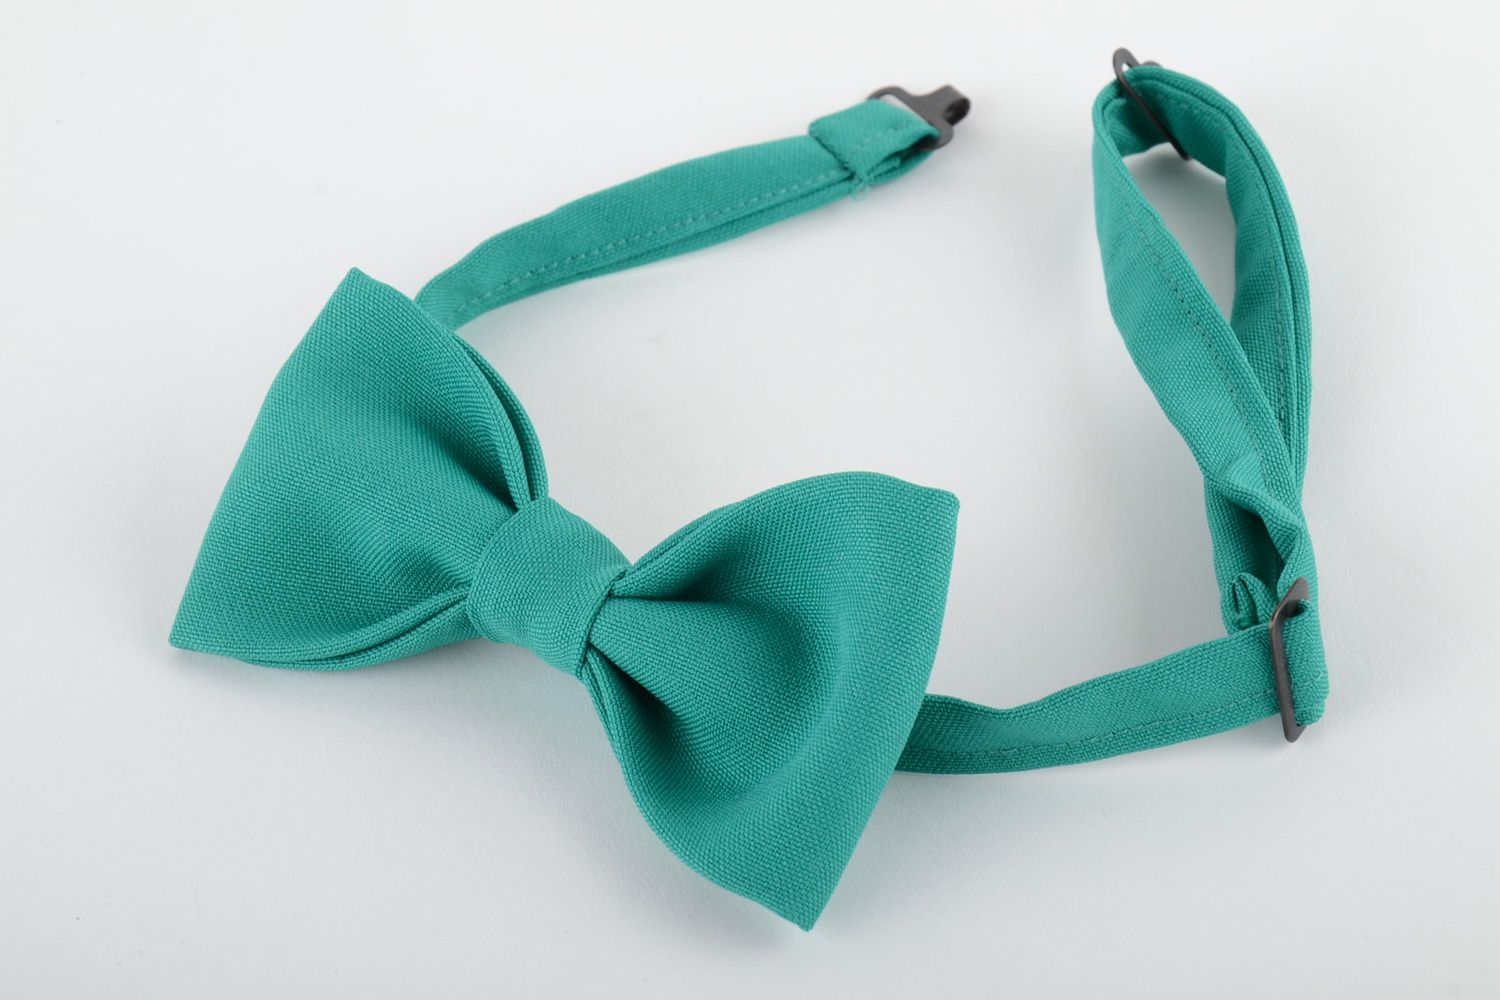 Handmade stylish bow tie sewn of costume fabric of turquoise color for men photo 2